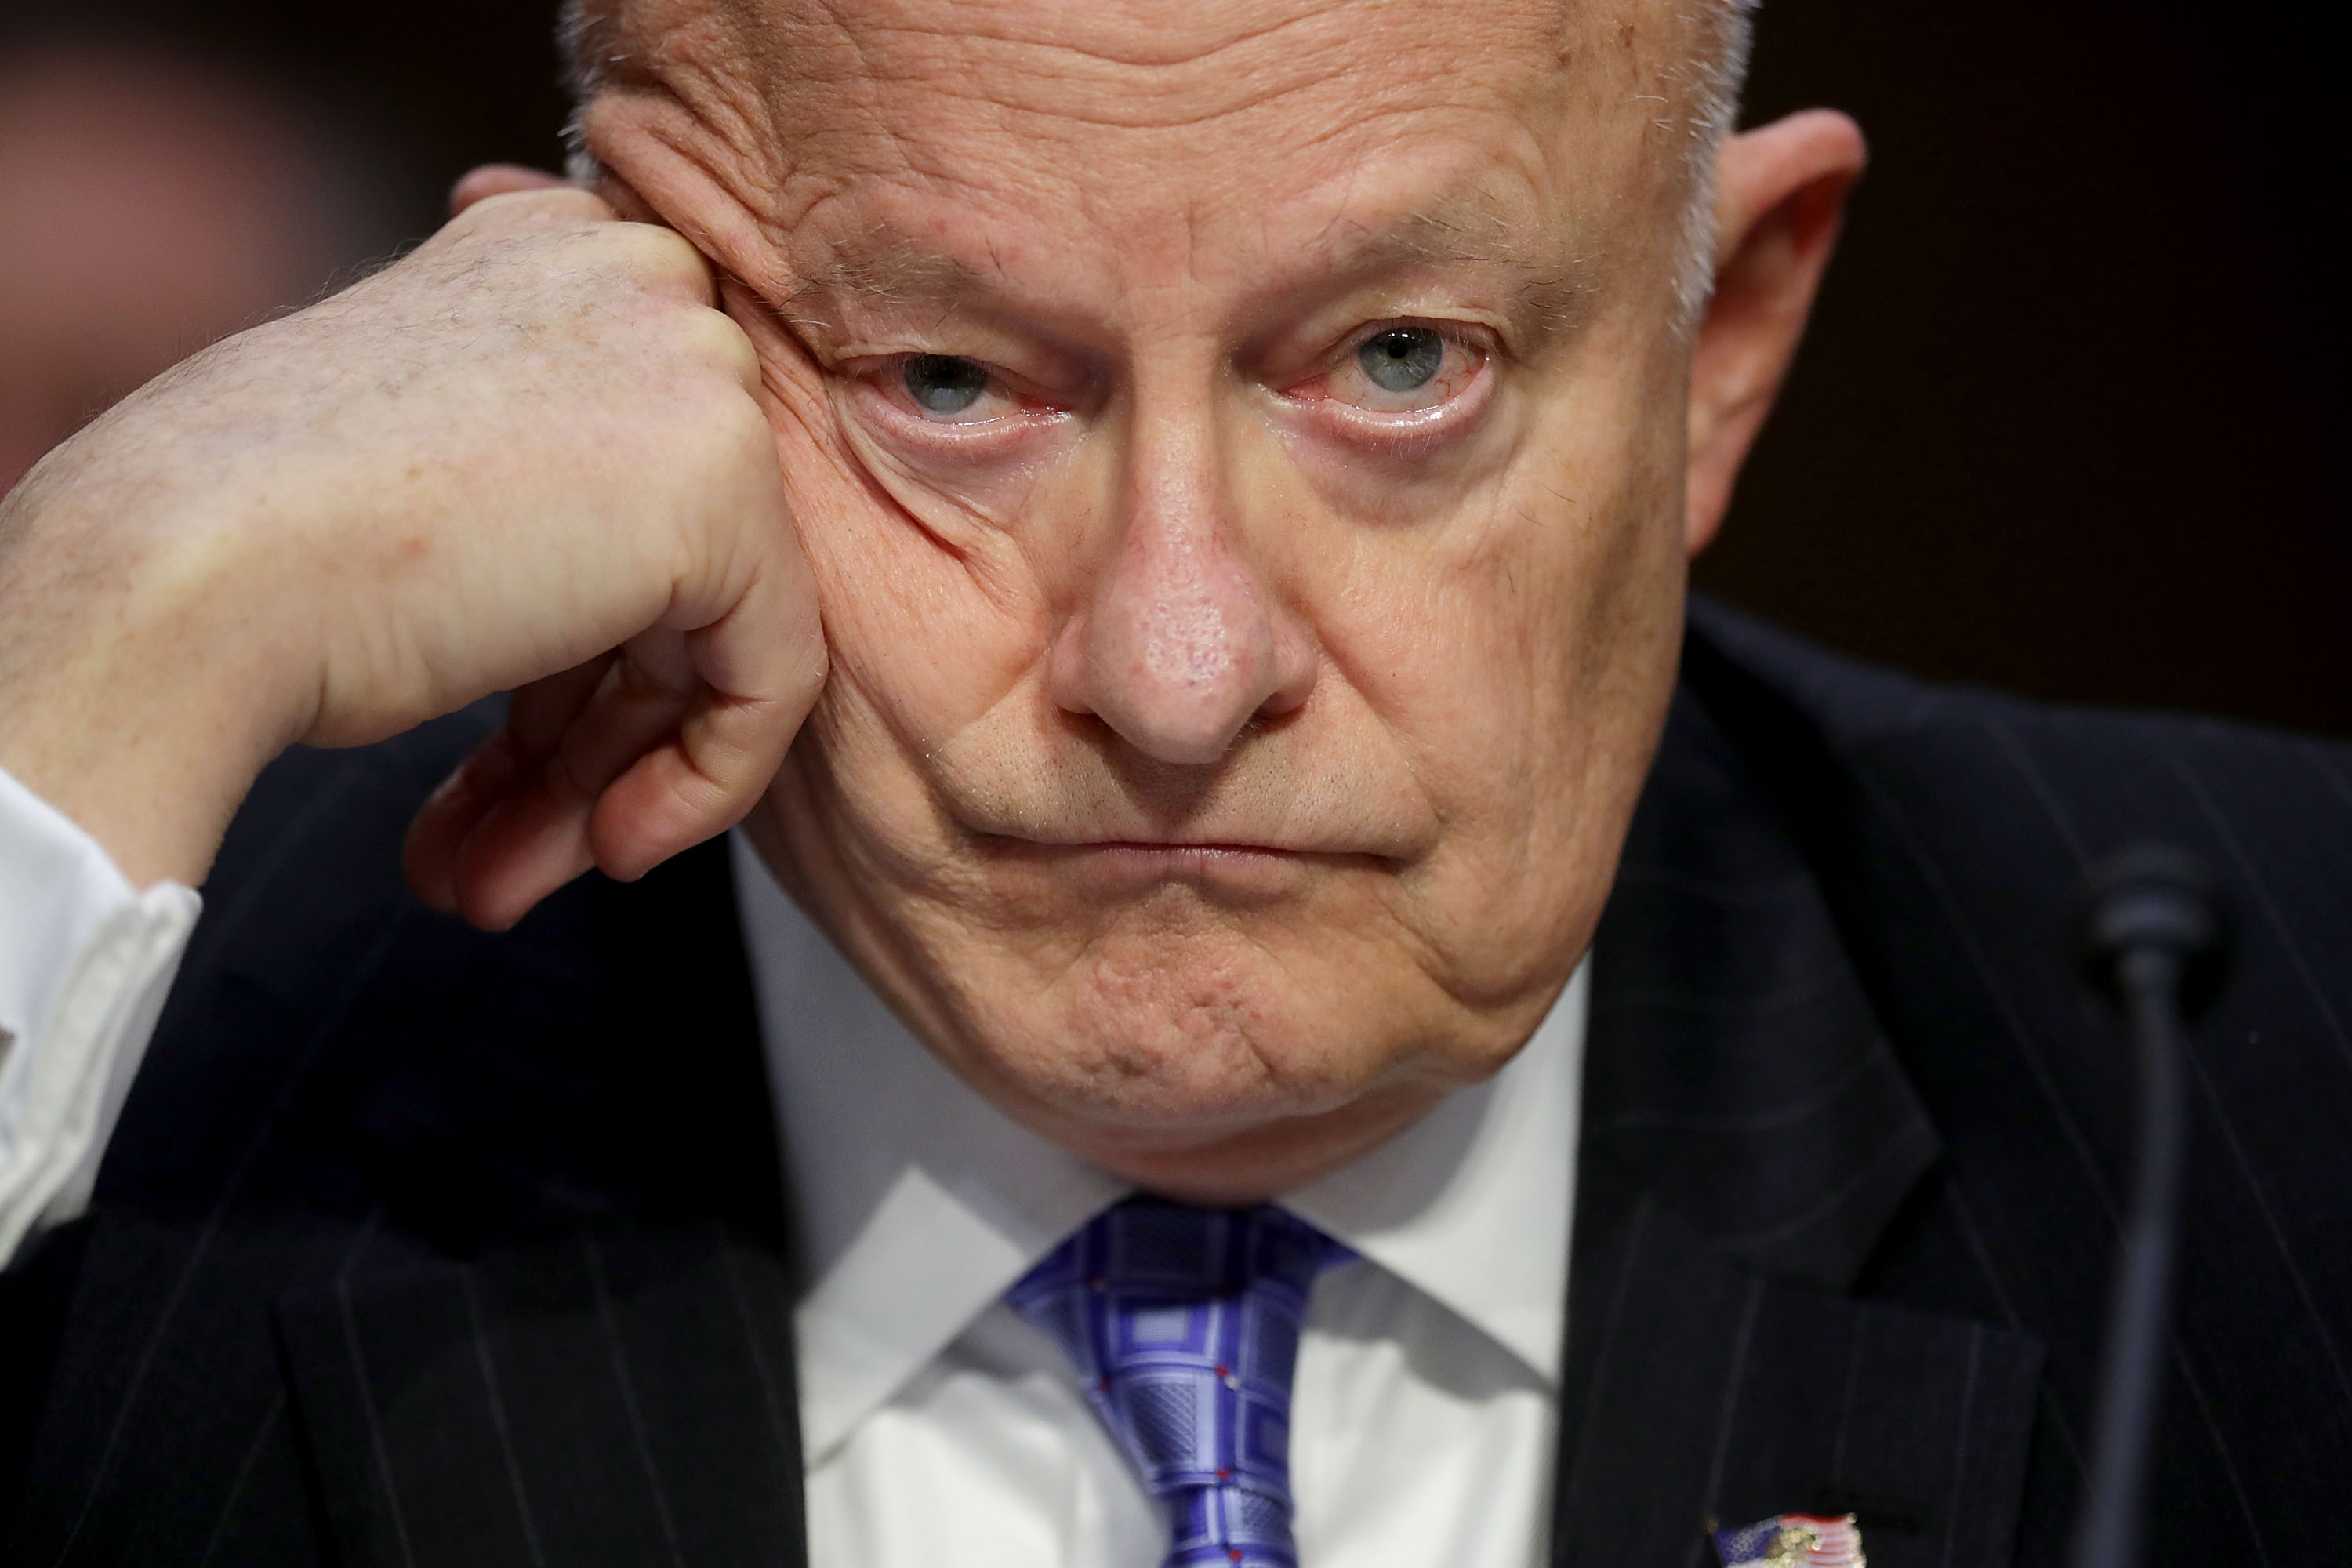 Former Director of National Intelligence James Clapper testifies before the Senate Judiciary Committee's Subcommittee on Crime and Terrorism in the Hart Senate Office Building on Capitol Hill May 8, 2017 in Washington, DC. (Photo by Chip Somodevilla/Getty Images)